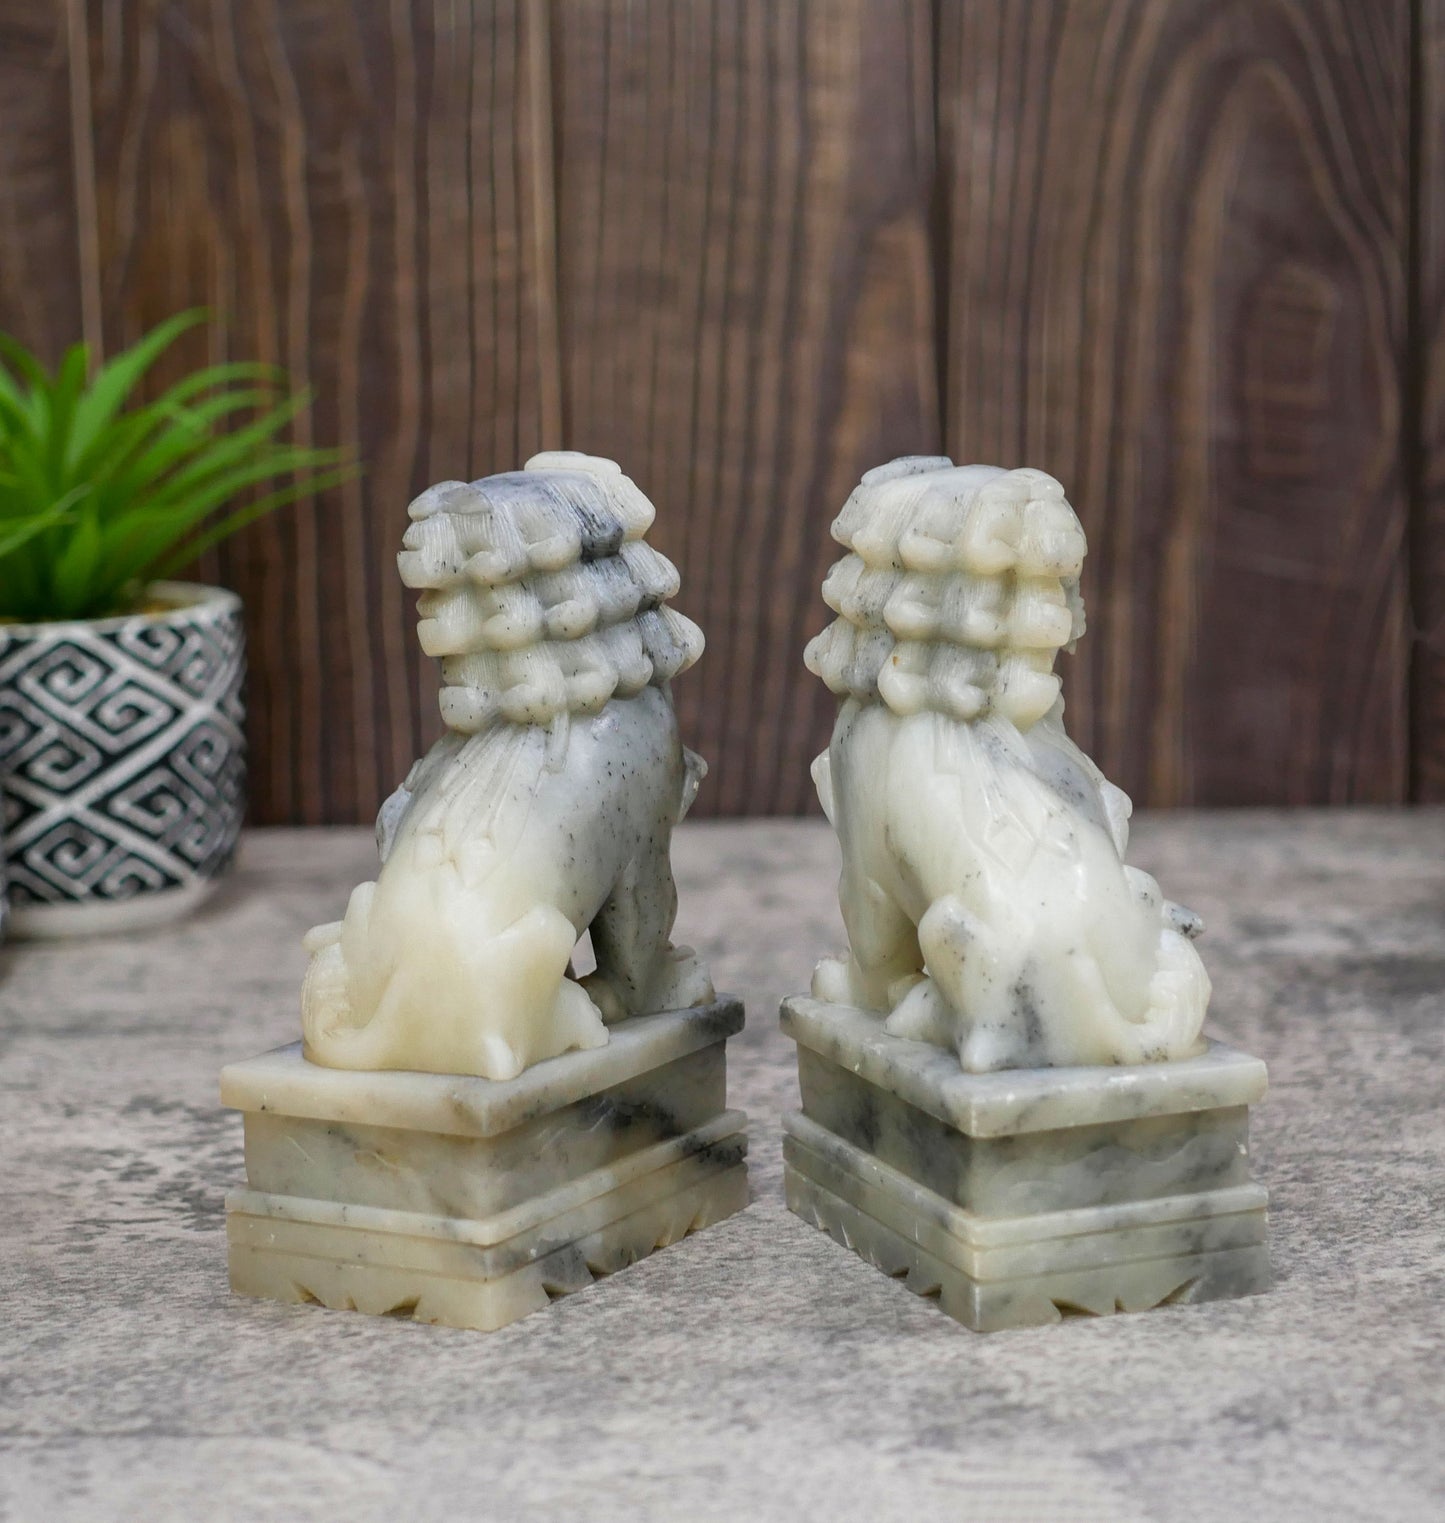 Vintage Chinese Foo Lion Dogs Hand Carved Soapstone Bookend Decor Statues - Pair 5.5" Tall